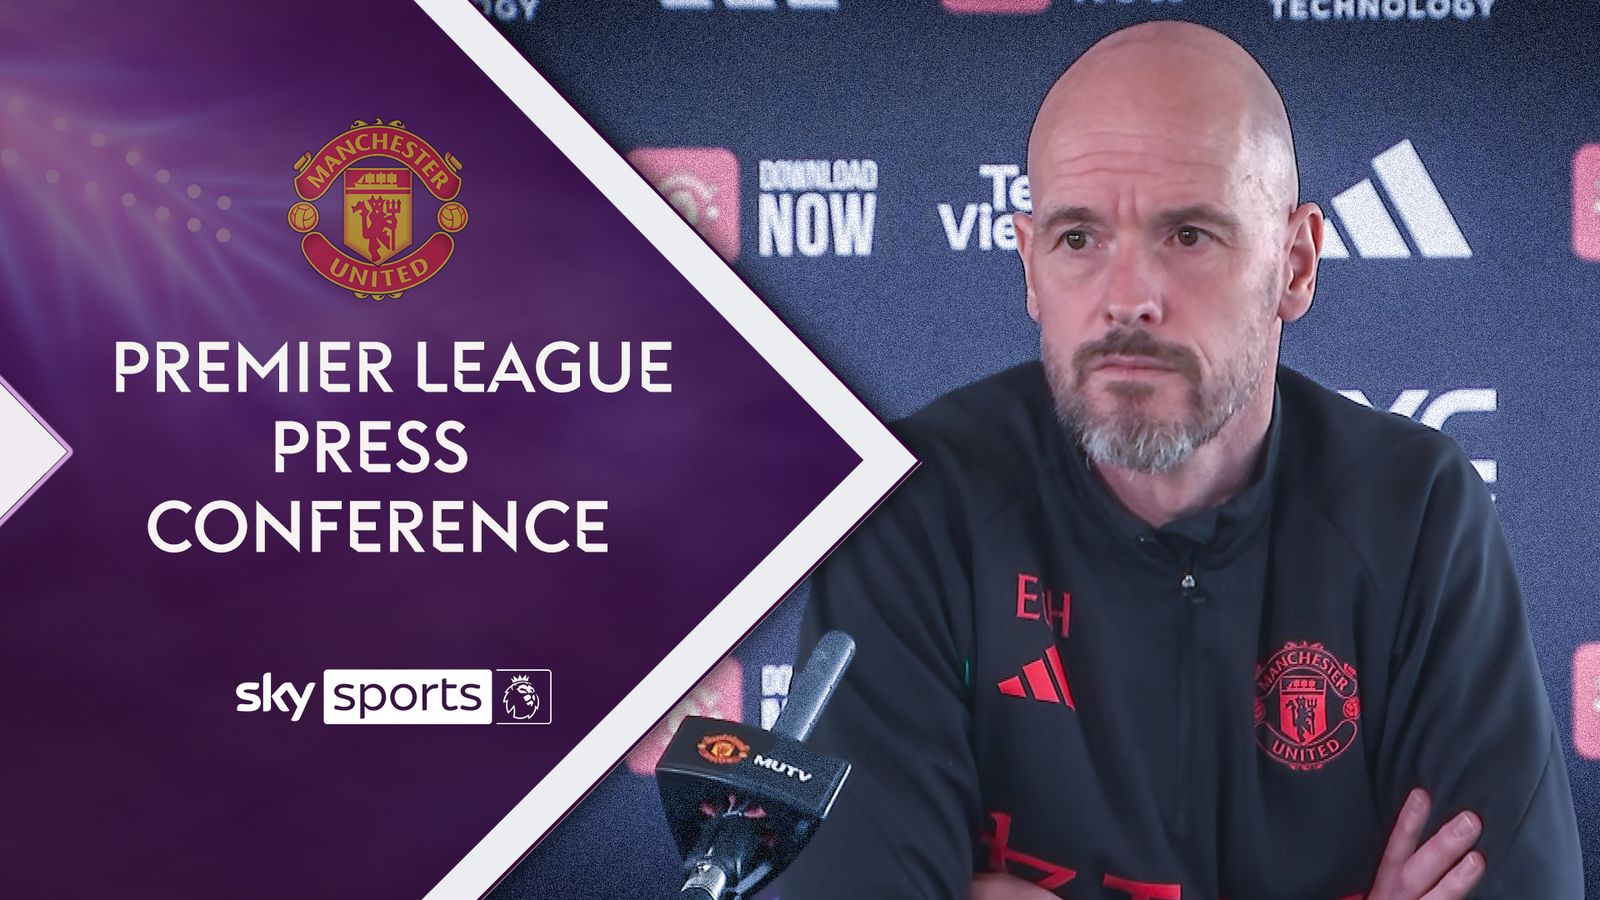 'They have common sense' | Ten Hag says Man Utd owners understand struggles